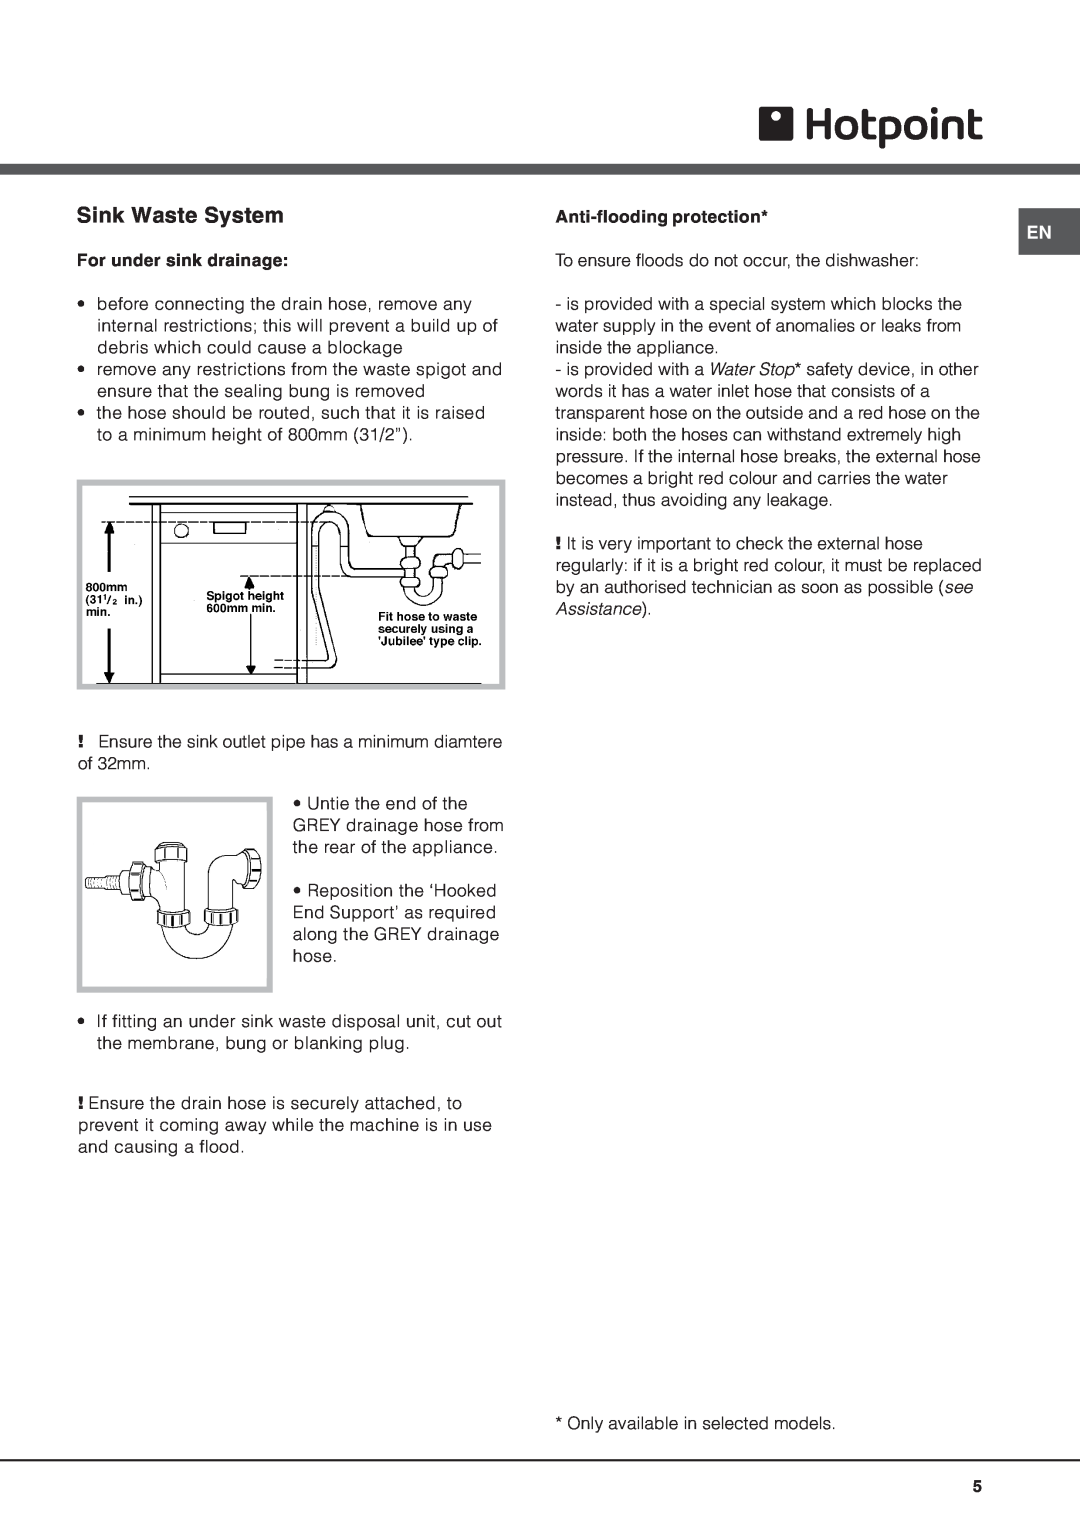 Hotpoint BFQ 700 manual Sink Waste System, For under sink drainage, Anti-floodingprotection 